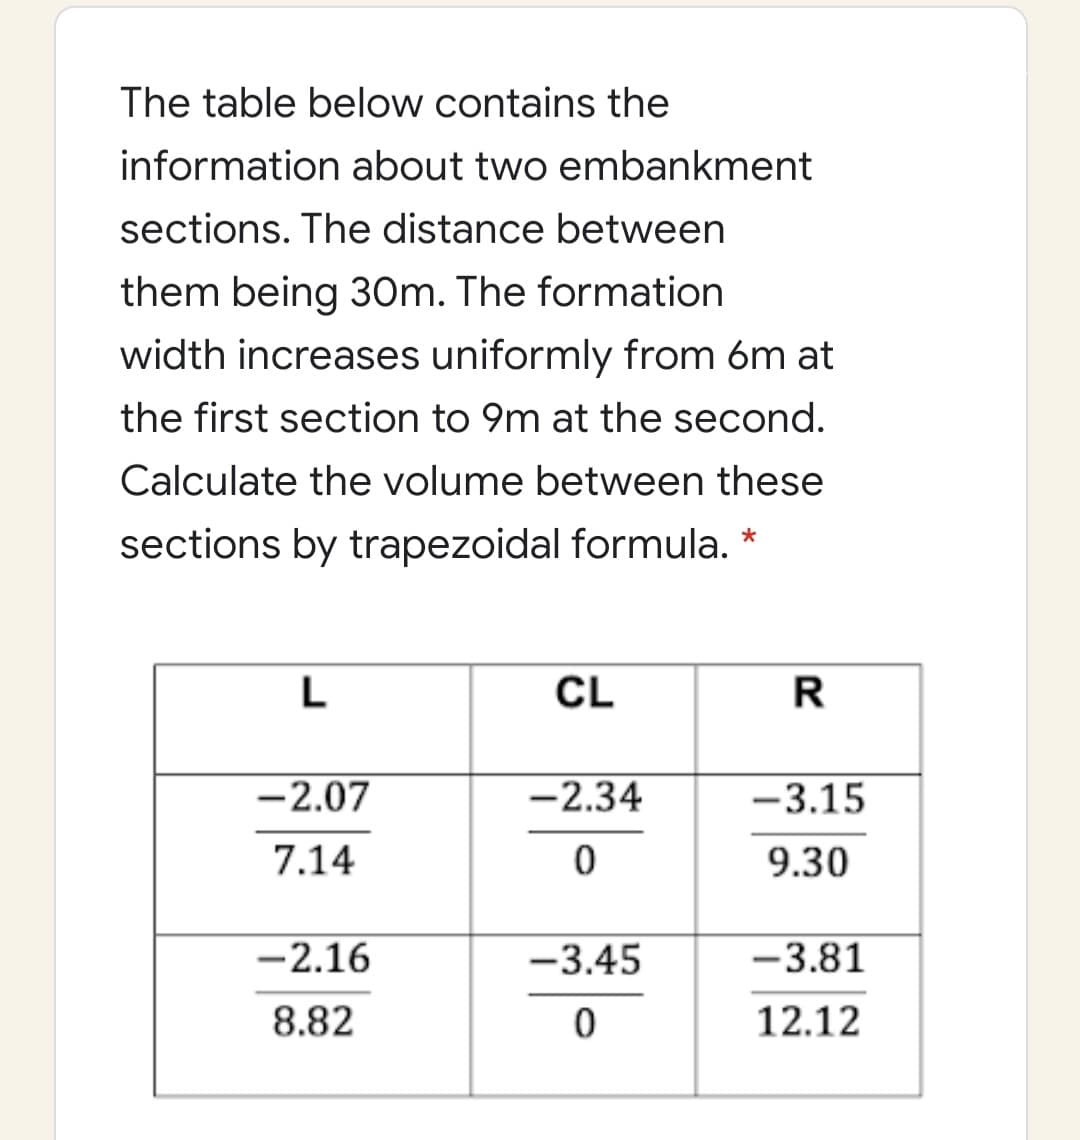 The table below contains the
information about two embankment
sections. The distance between
them being 30m. The formation
width increases uniformly from óm at
the first section to 9m at the second.
Calculate the volume between these
sections by trapezoidal formula.
L
CL
R
-2.07
-2.34
-3.15
7.14
9.30
-2.16
-3.45
-3.81
8.82
12.12
